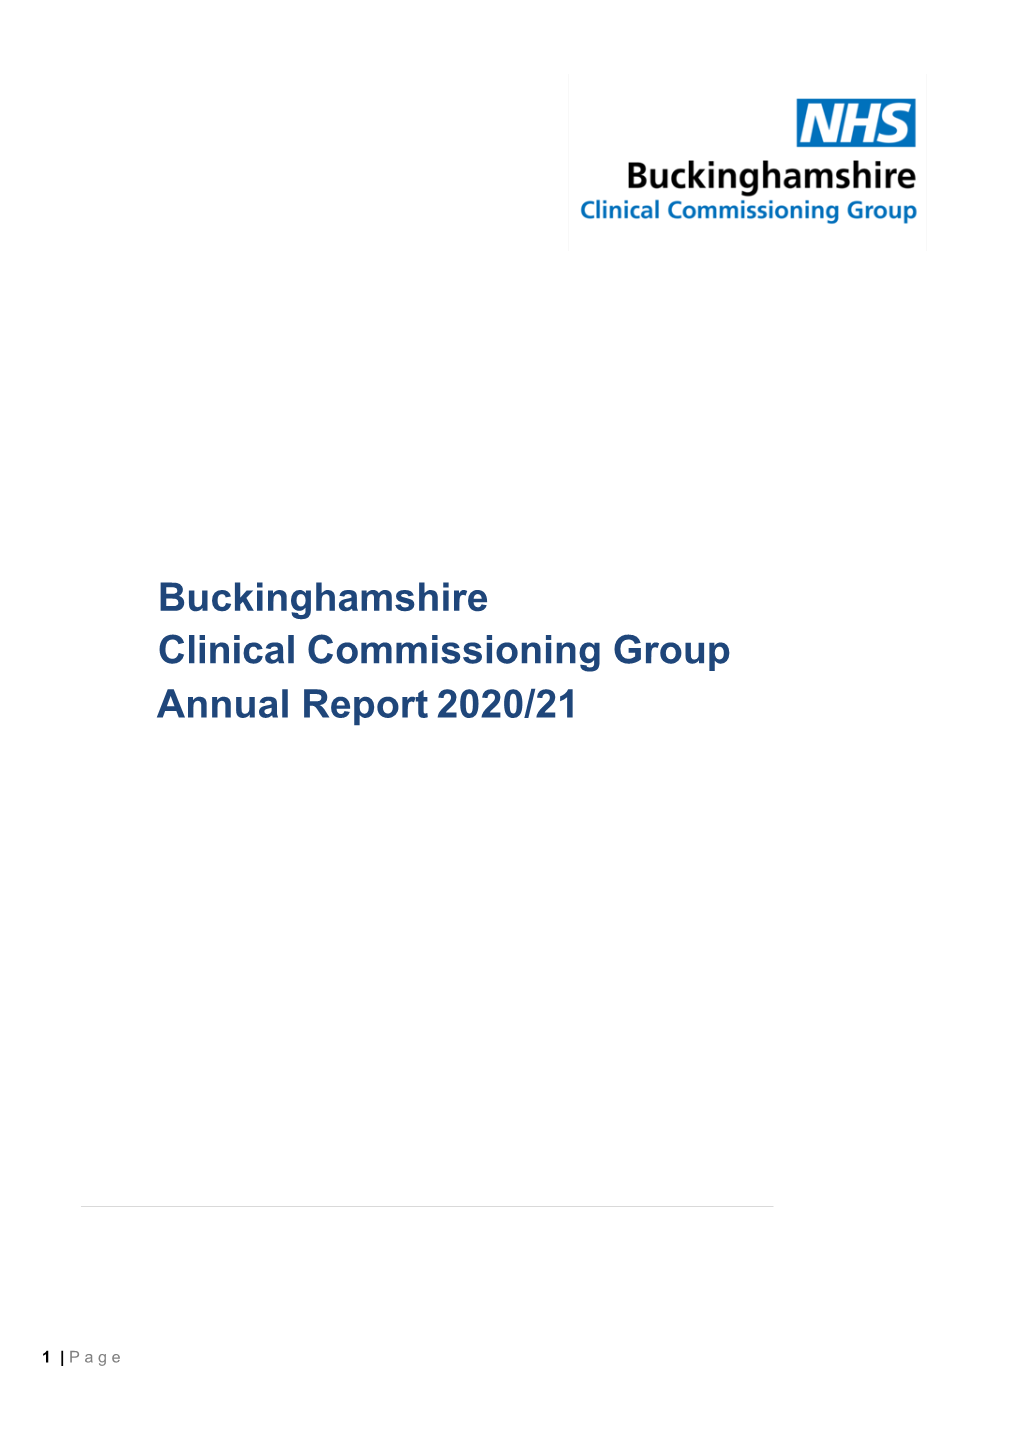 NHS Buckinghamshire Clinical Commissioning Group Annual